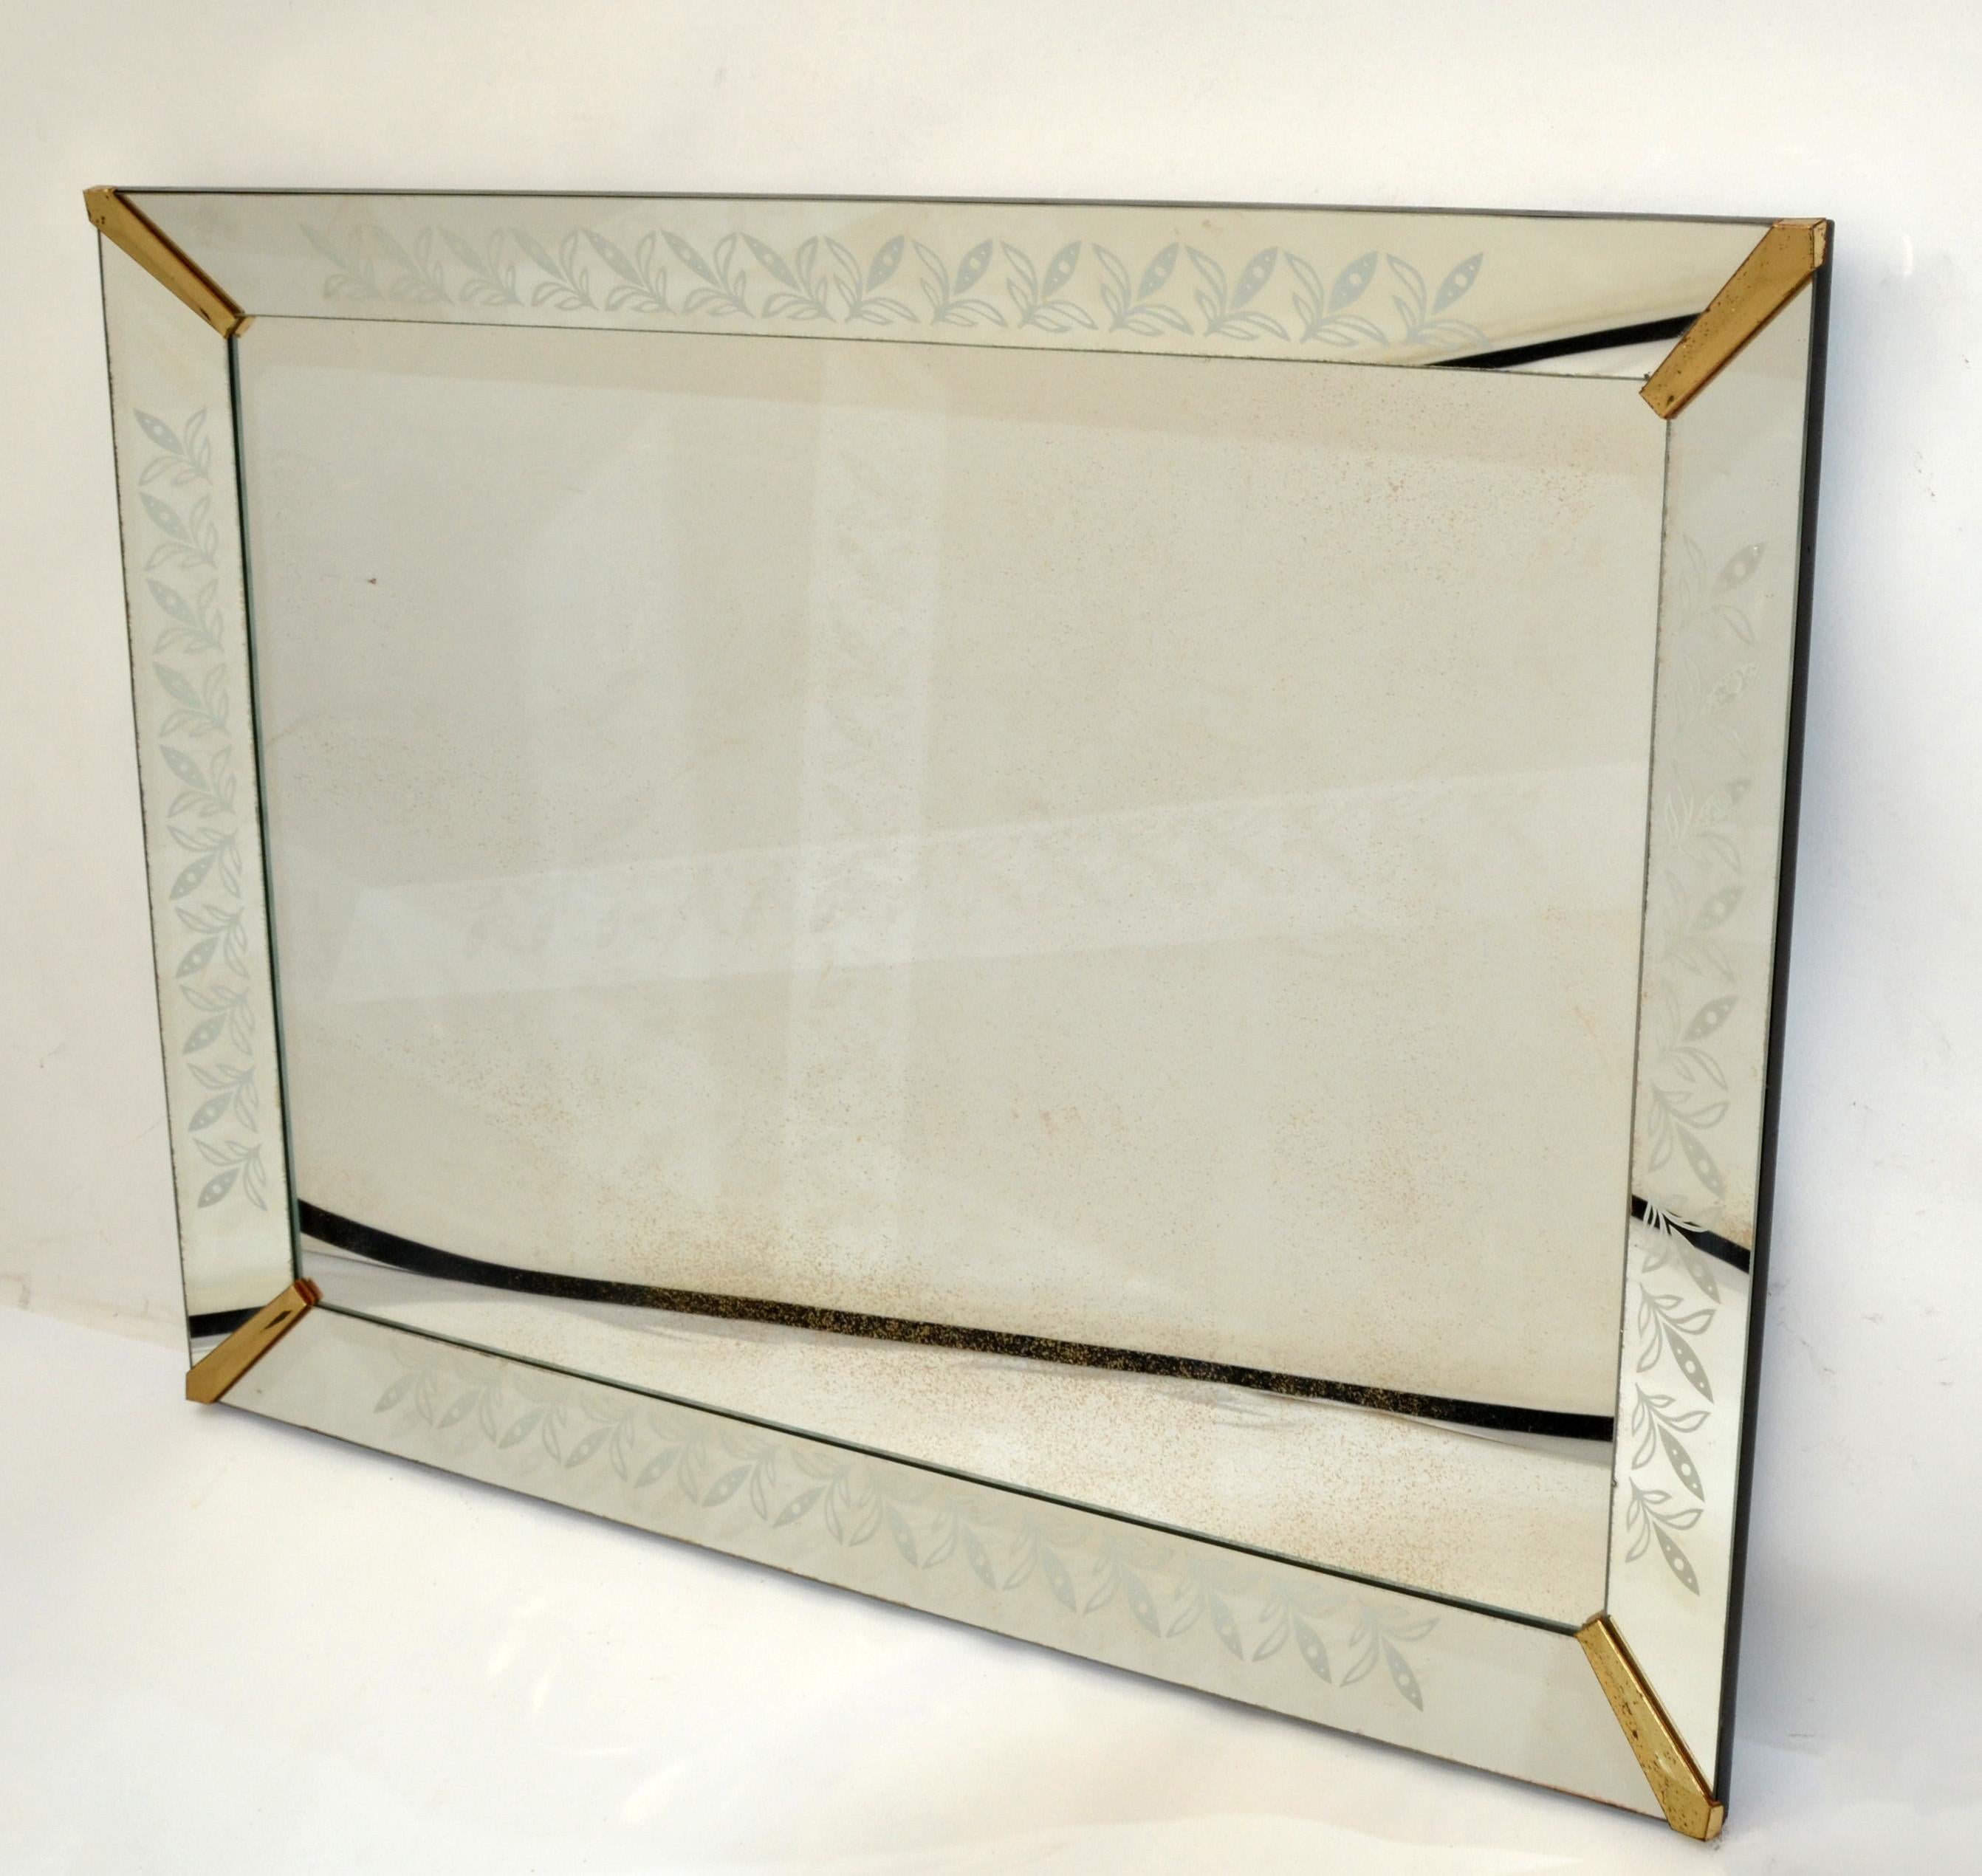 1940s Art Deco Venetian Style Etched Wall Mirror with Brass Finished Corners 10